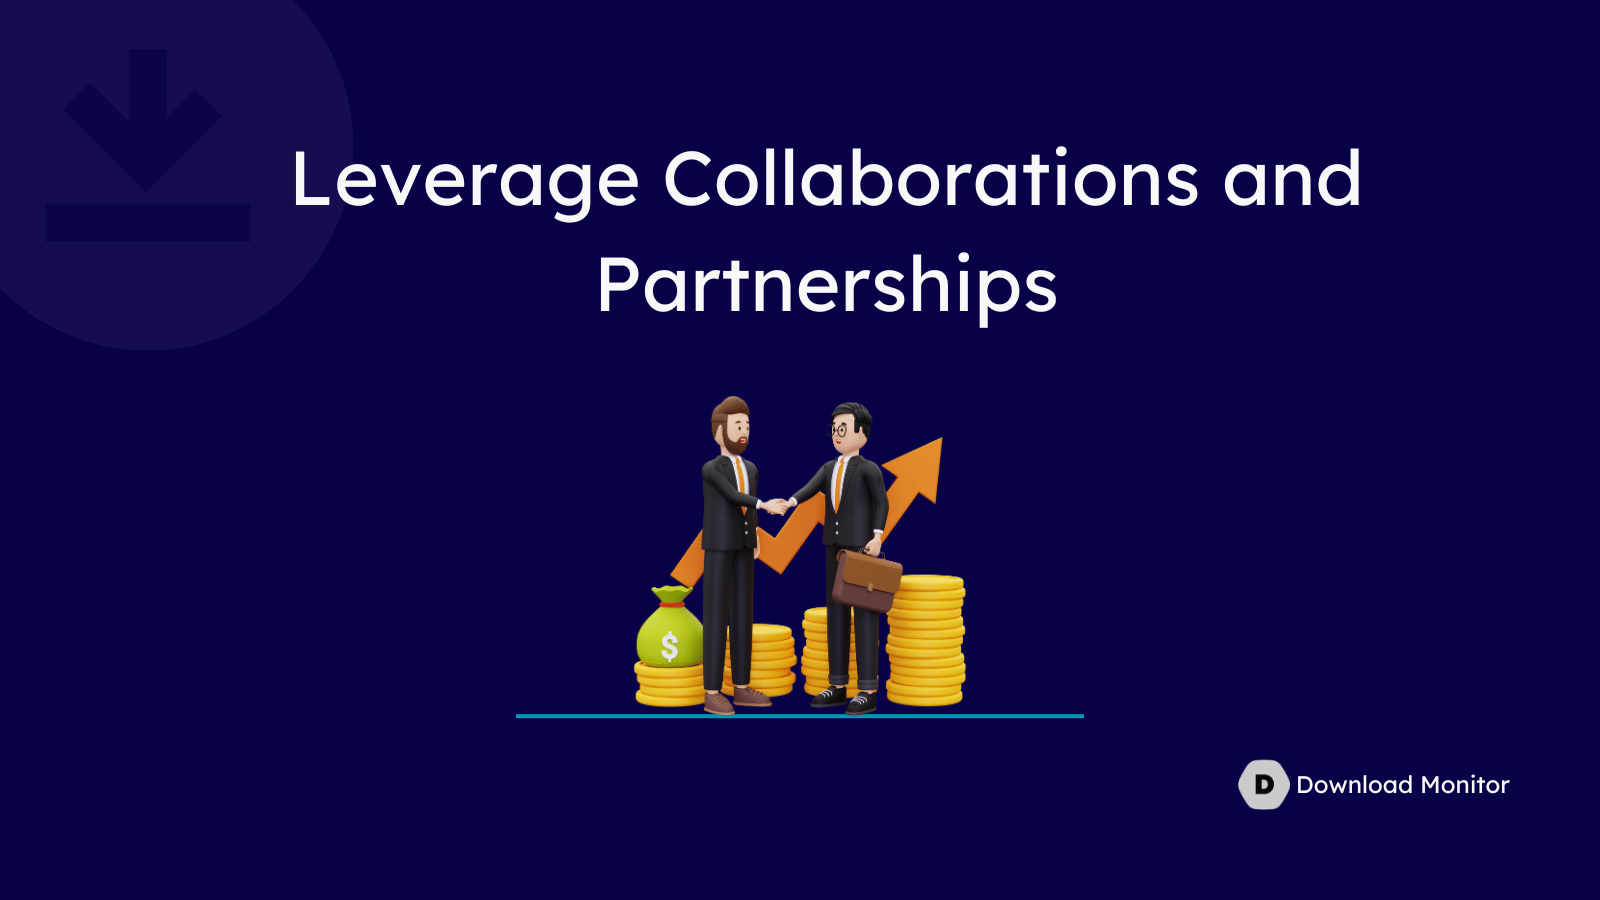 Leverage Collaborations and Partnerships